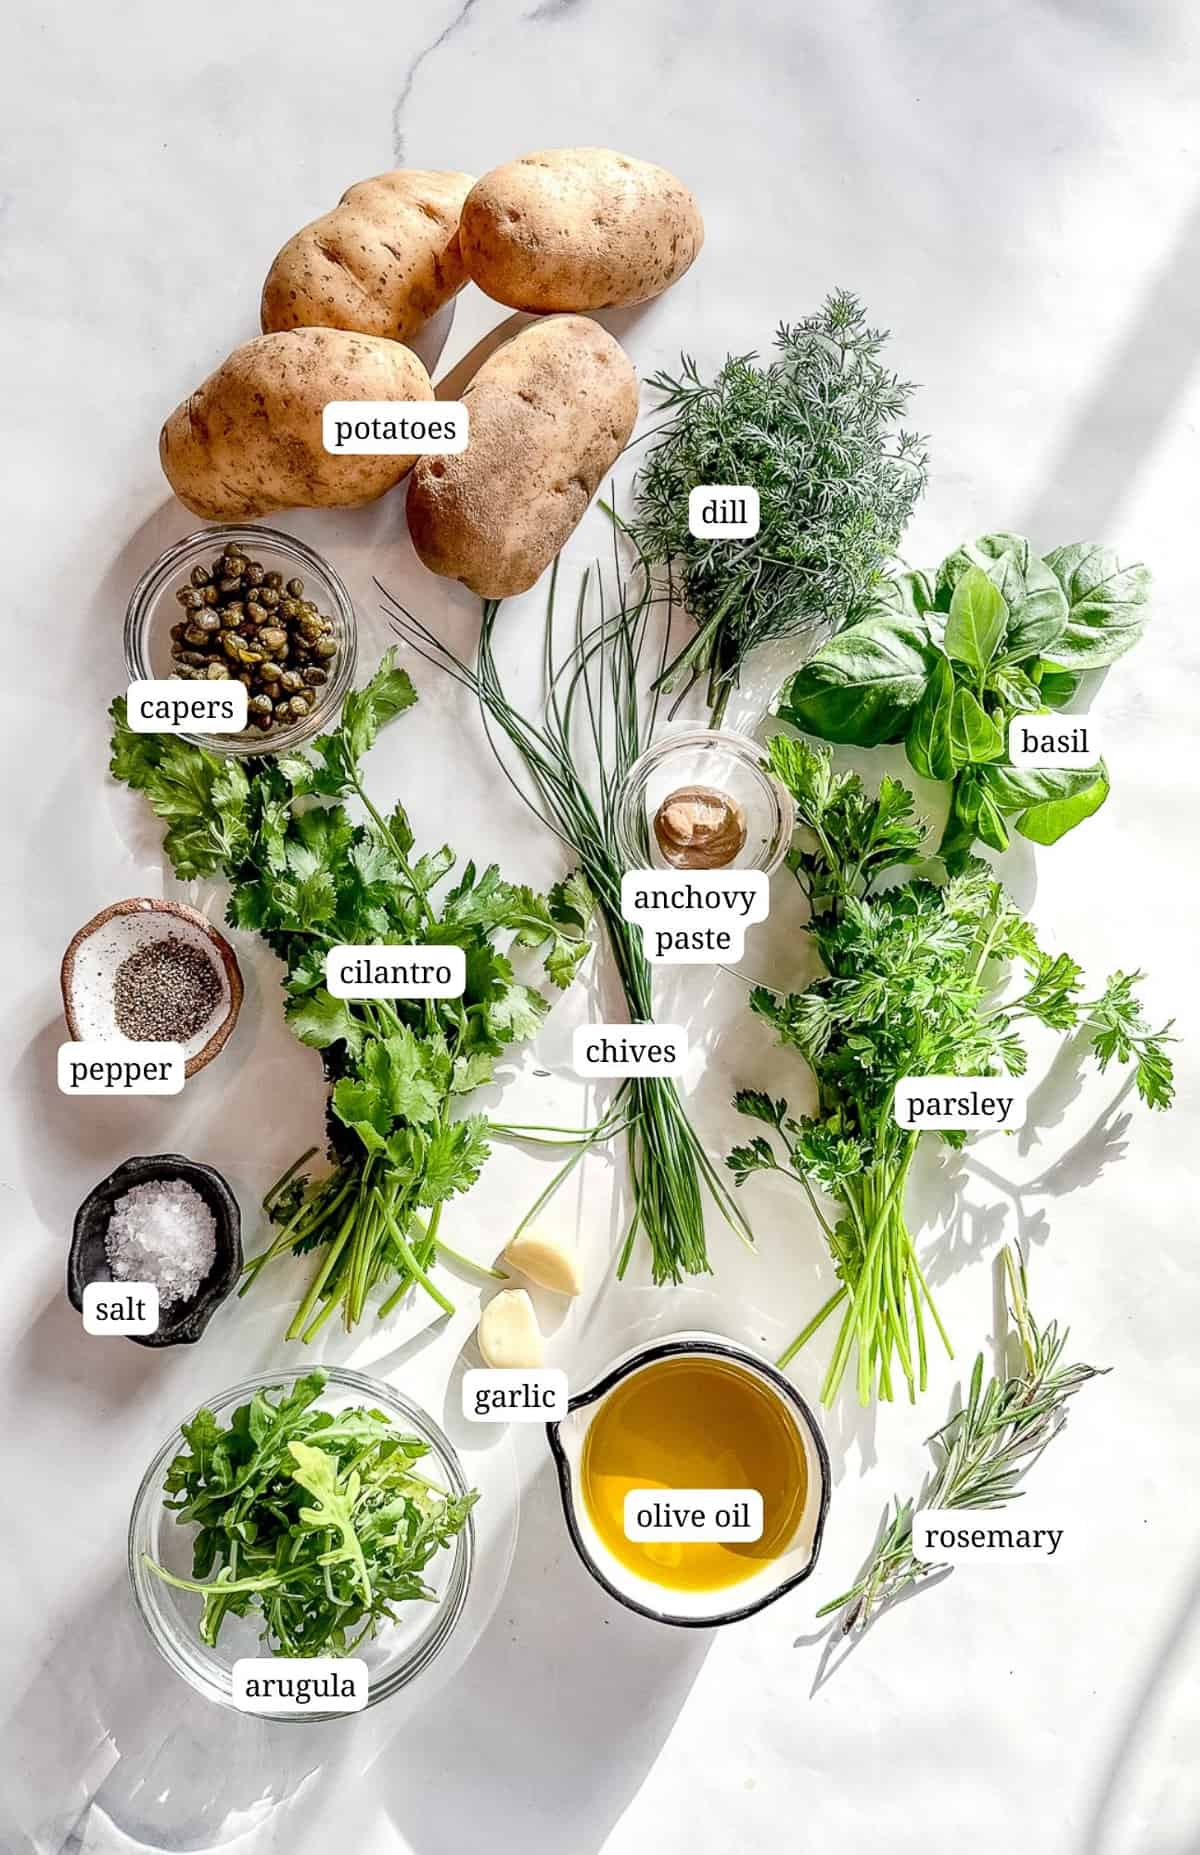 Labeled image of ingredients needed to make crispy potatoes with salsa verde.